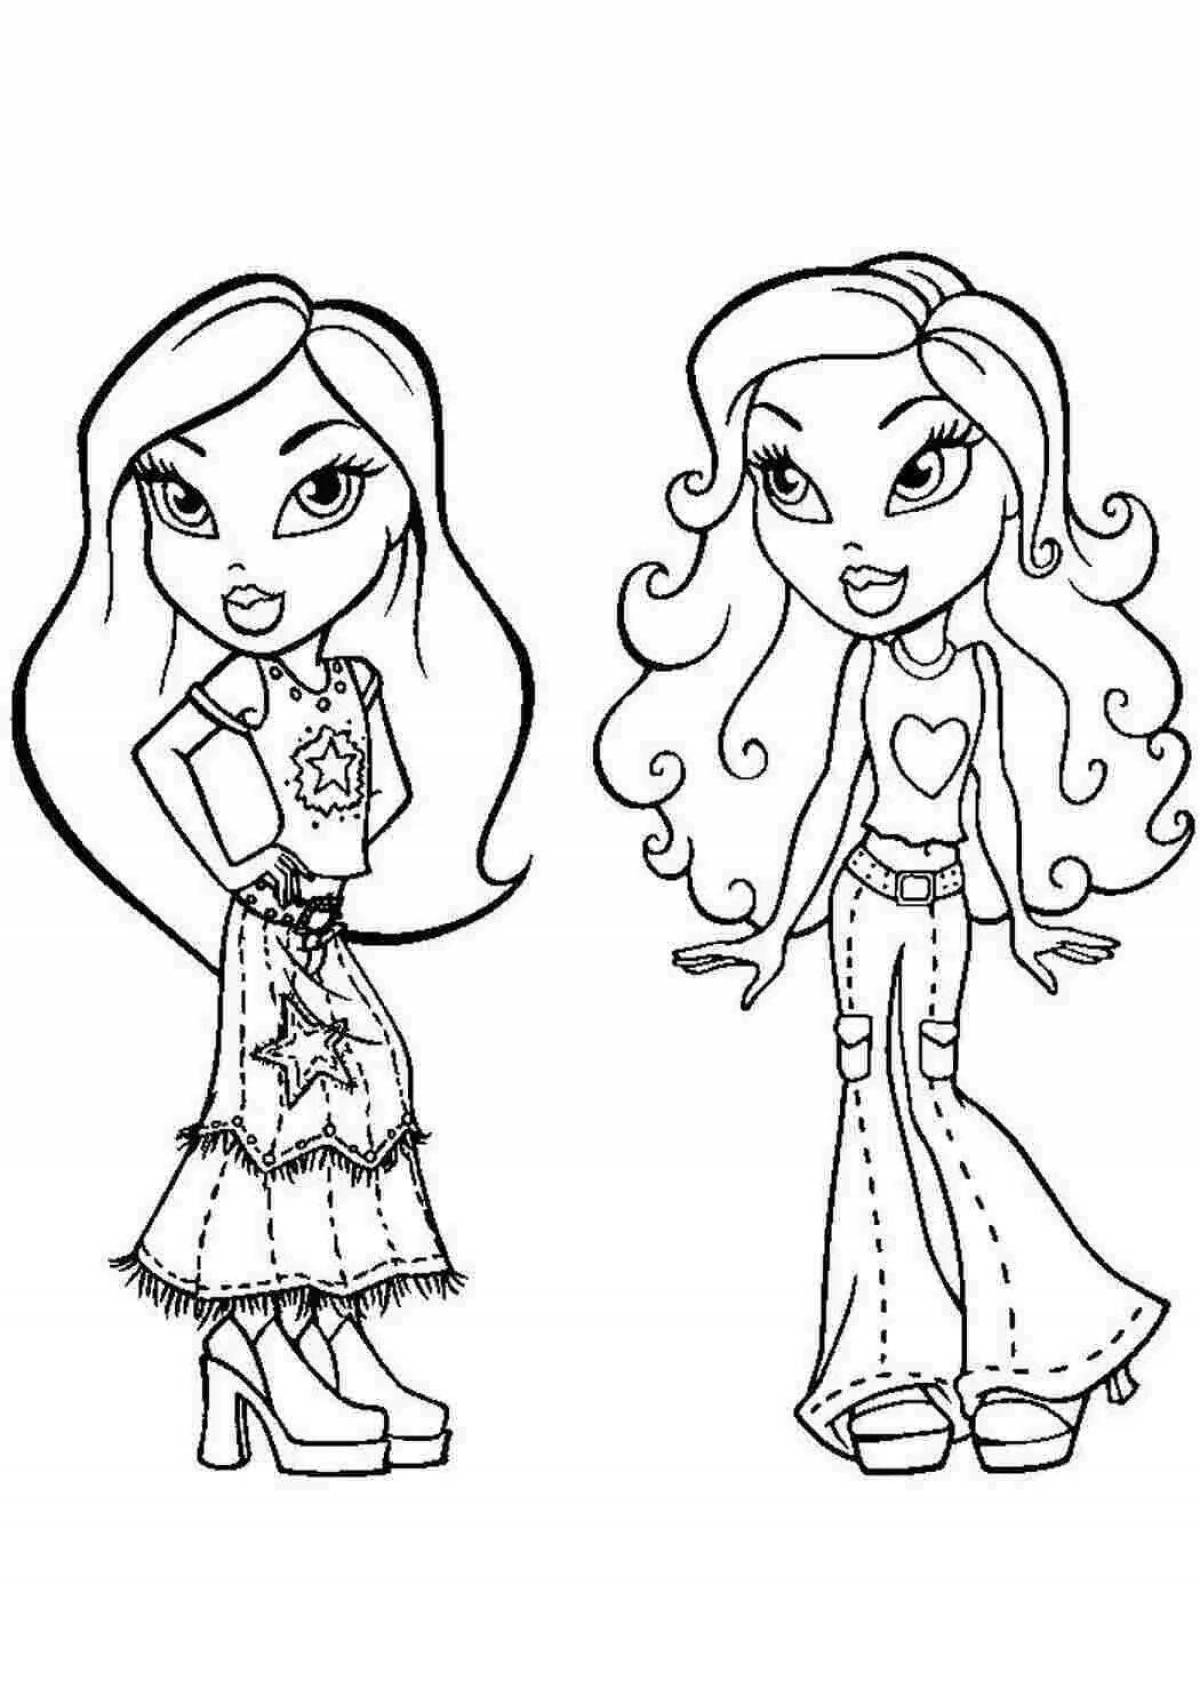 Fancy coloring page for girls